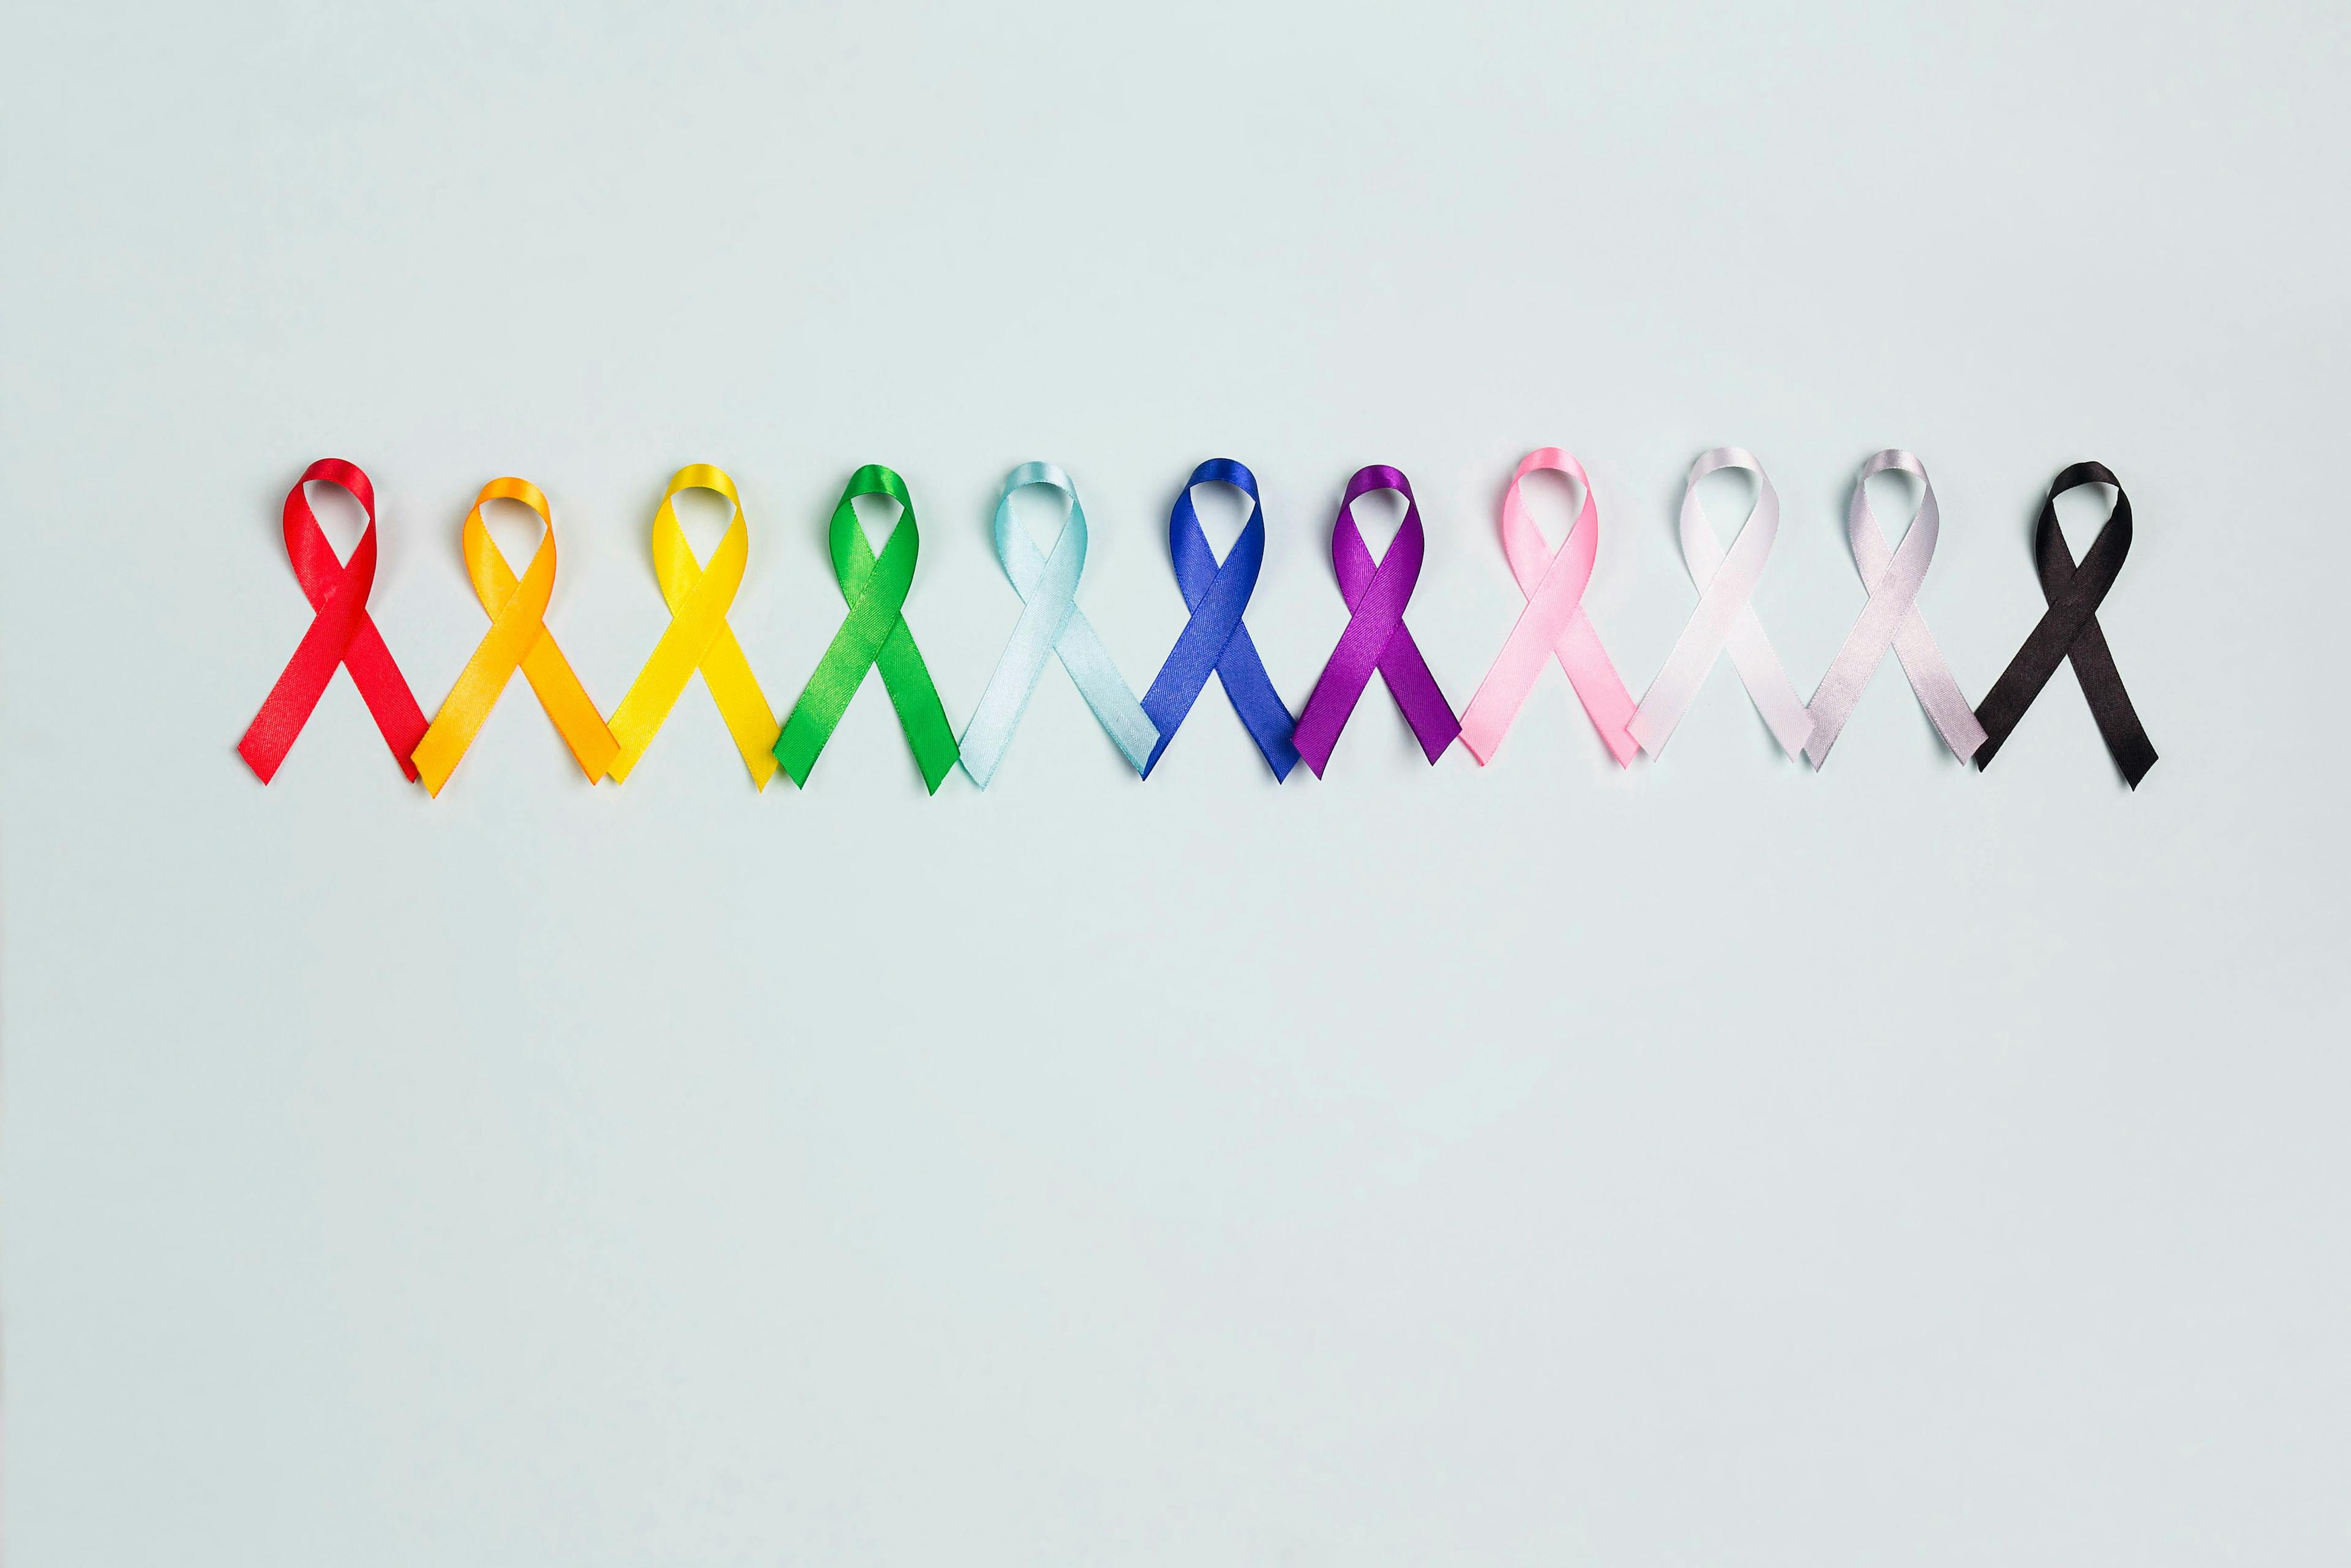 World cancer day concept, February 4. Colorful awareness ribbons on blue background. | Image Credit: WindyNight – stock.adobe.com